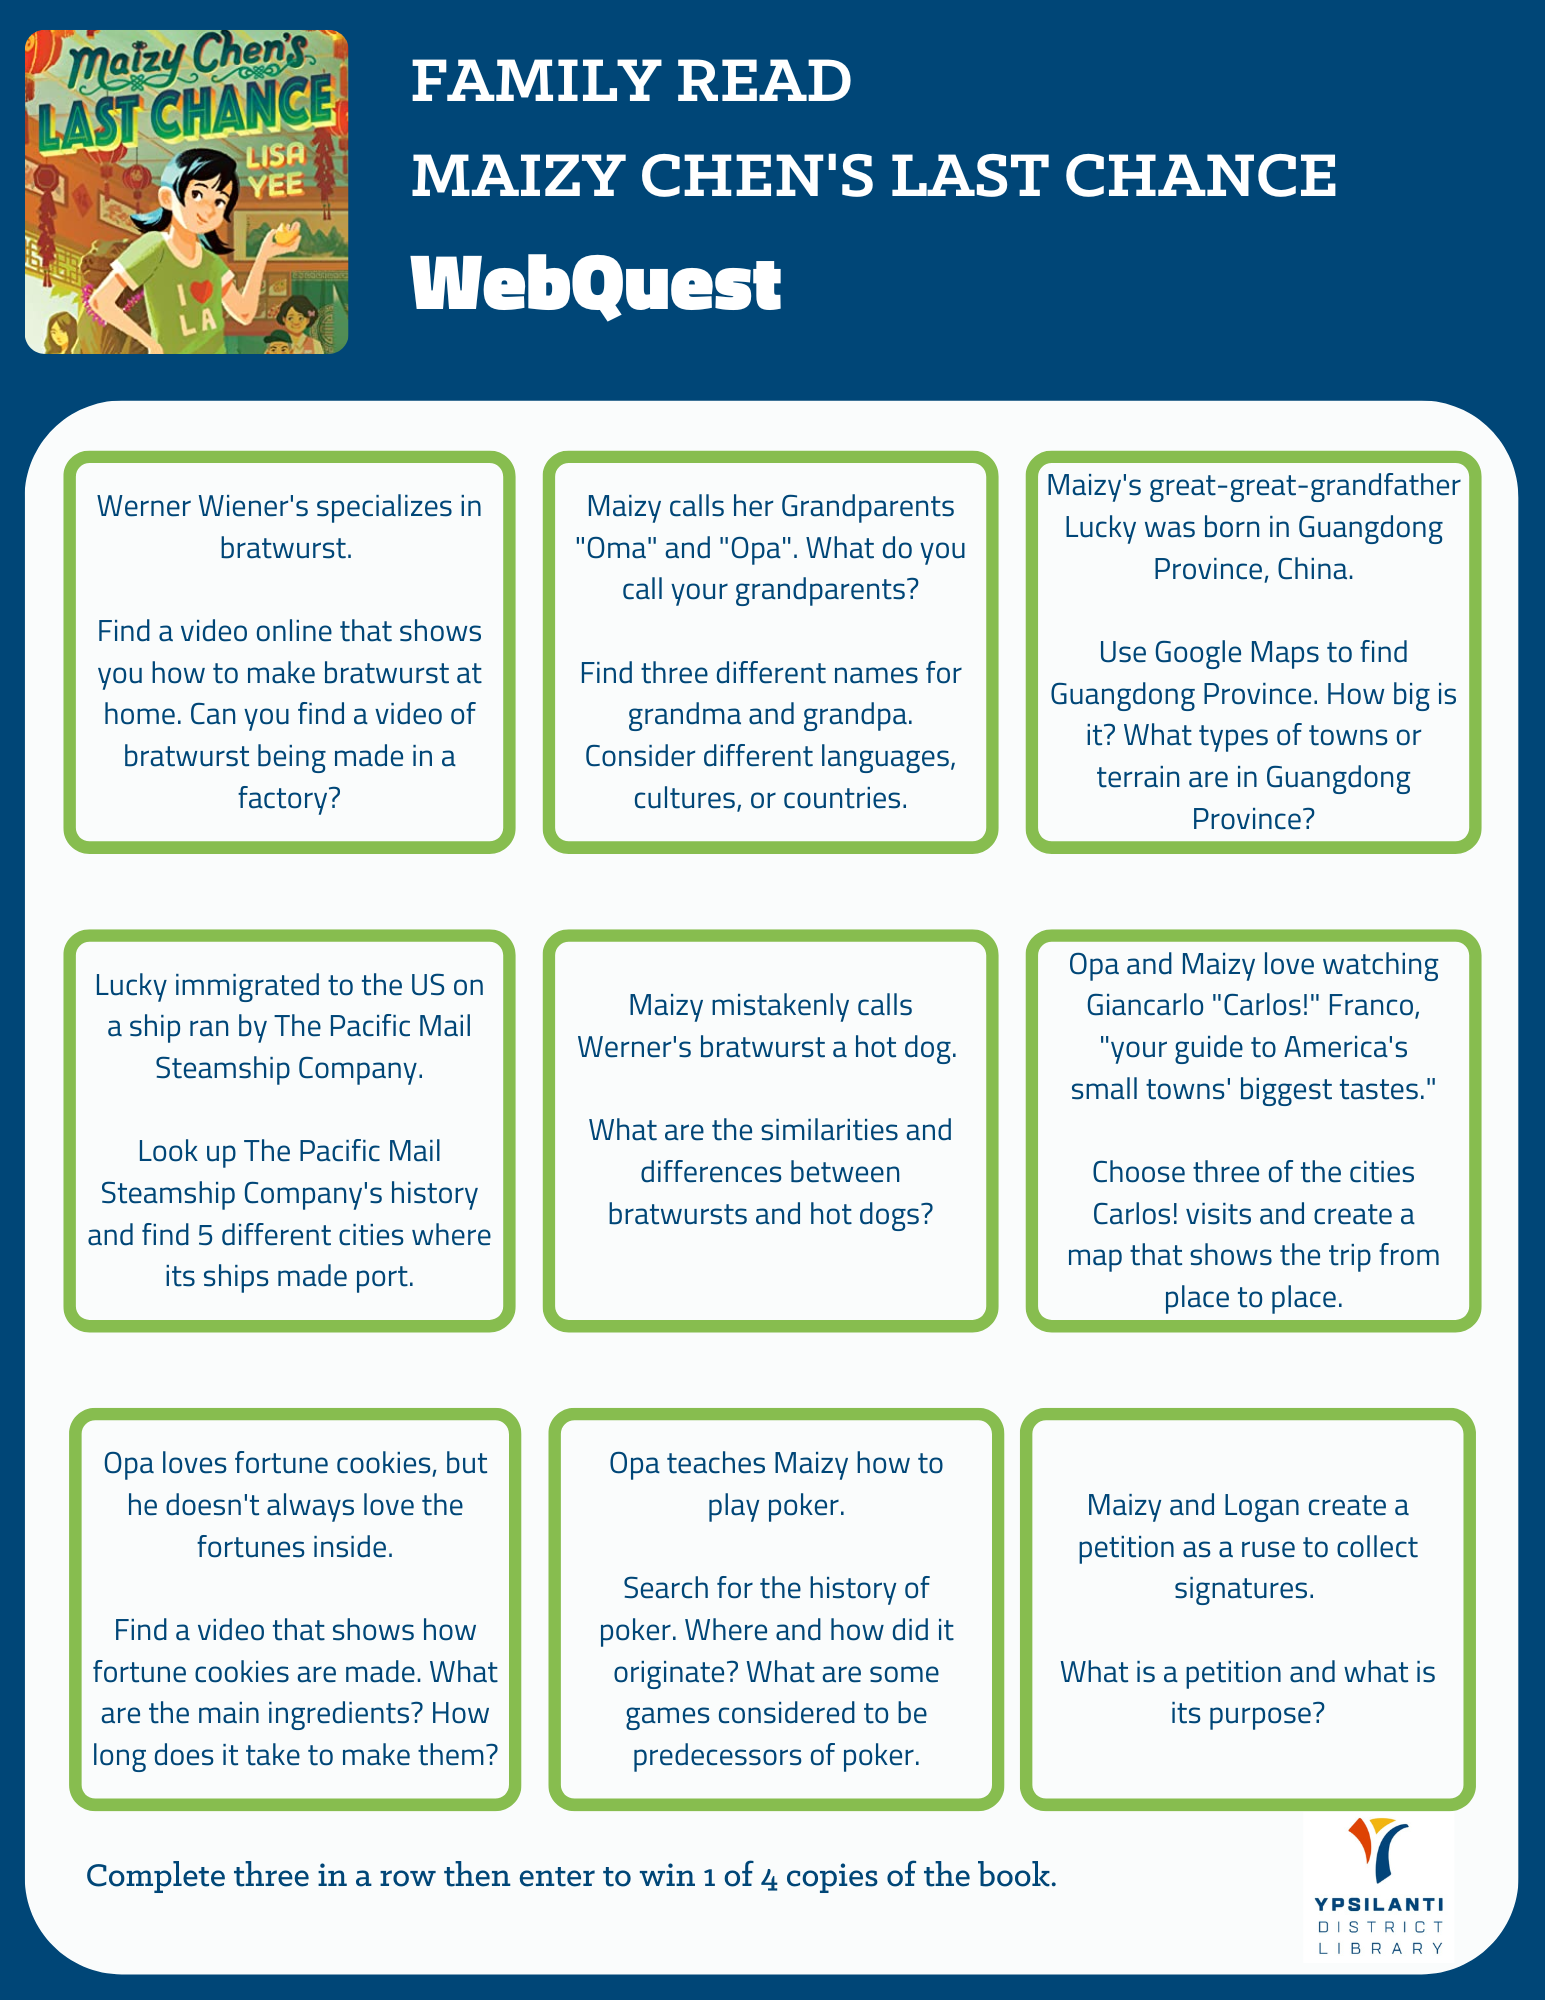 image of maizy chen webquest click for a readable version